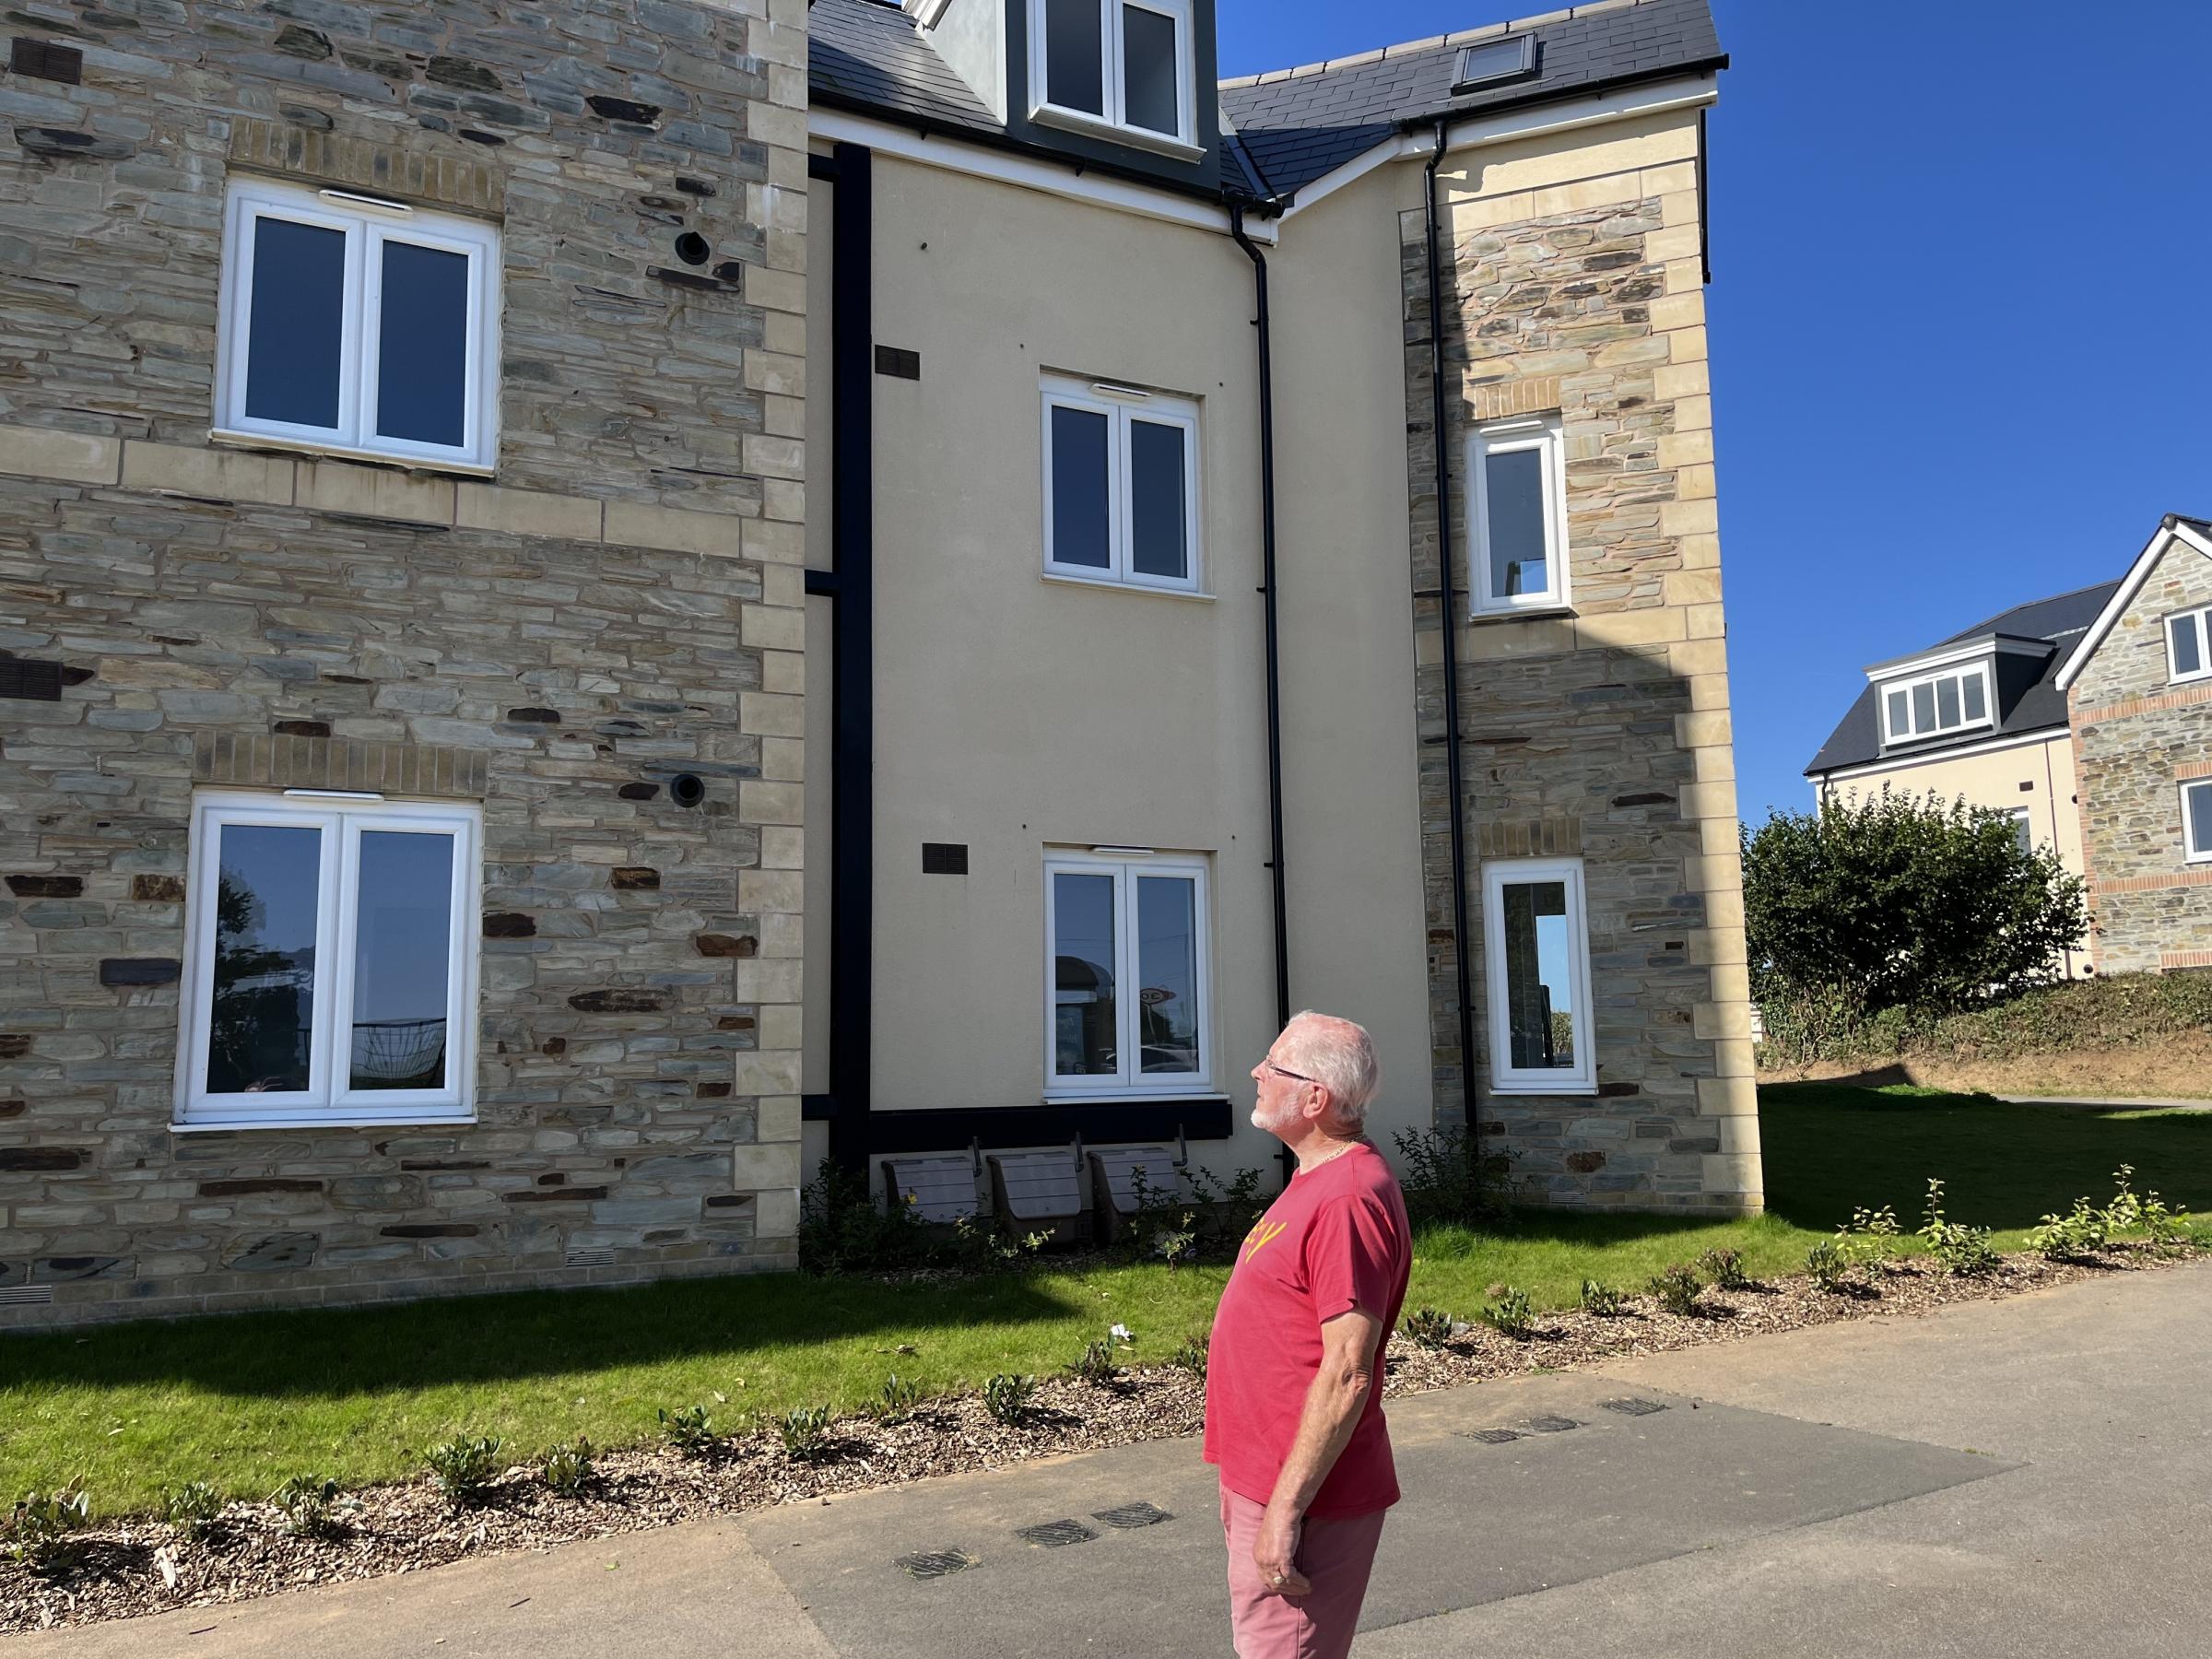 David Stone surveys the empty properties on the Copperfields housing estate in Truro